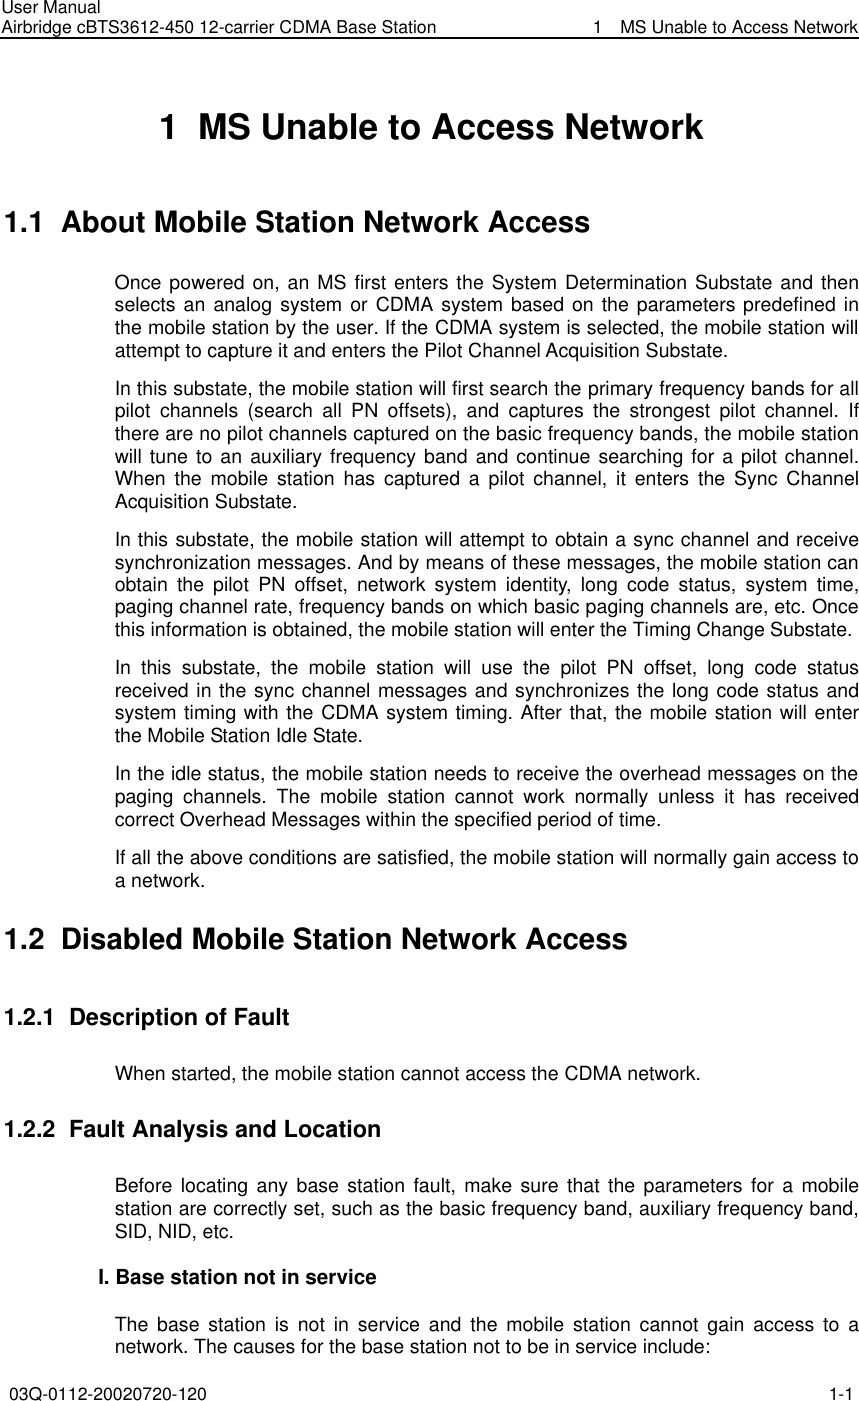 User Manual Airbridge cBTS3612-450 12-carrier CDMA Base Station   1  MS Unable to Access Network 03Q-0112-20020720-120 1-1  1  MS Unable to Access Network 1.1  About Mobile Station Network Access   Once powered on, an MS first enters the System Determination Substate and then selects an analog system or CDMA system based on the parameters predefined in the mobile station by the user. If the CDMA system is selected, the mobile station will attempt to capture it and enters the Pilot Channel Acquisition Substate. In this substate, the mobile station will first search the primary frequency bands for all pilot channels (search all PN offsets), and captures the strongest pilot channel. If there are no pilot channels captured on the basic frequency bands, the mobile station will tune to an auxiliary frequency band and continue searching for a pilot channel. When the mobile station has captured a pilot channel, it enters the Sync Channel Acquisition Substate. In this substate, the mobile station will attempt to obtain a sync channel and receive synchronization messages. And by means of these messages, the mobile station can obtain the pilot PN offset, network system identity, long code status, system time, paging channel rate, frequency bands on which basic paging channels are, etc. Once this information is obtained, the mobile station will enter the Timing Change Substate. In this substate, the mobile station will use the pilot PN offset, long code status received in the sync channel messages and synchronizes the long code status and system timing with the CDMA system timing. After that, the mobile station will enter the Mobile Station Idle State.   In the idle status, the mobile station needs to receive the overhead messages on the paging channels. The mobile station cannot work normally unless it has received correct Overhead Messages within the specified period of time. If all the above conditions are satisfied, the mobile station will normally gain access to a network. 1.2  Disabled Mobile Station Network Access   1.2.1  Description of Fault When started, the mobile station cannot access the CDMA network. 1.2.2  Fault Analysis and Location Before locating any base station fault, make sure that the parameters for a mobile station are correctly set, such as the basic frequency band, auxiliary frequency band, SID, NID, etc. I. Base station not in service The base station is not in service and the mobile station cannot gain access to a network. The causes for the base station not to be in service include: 